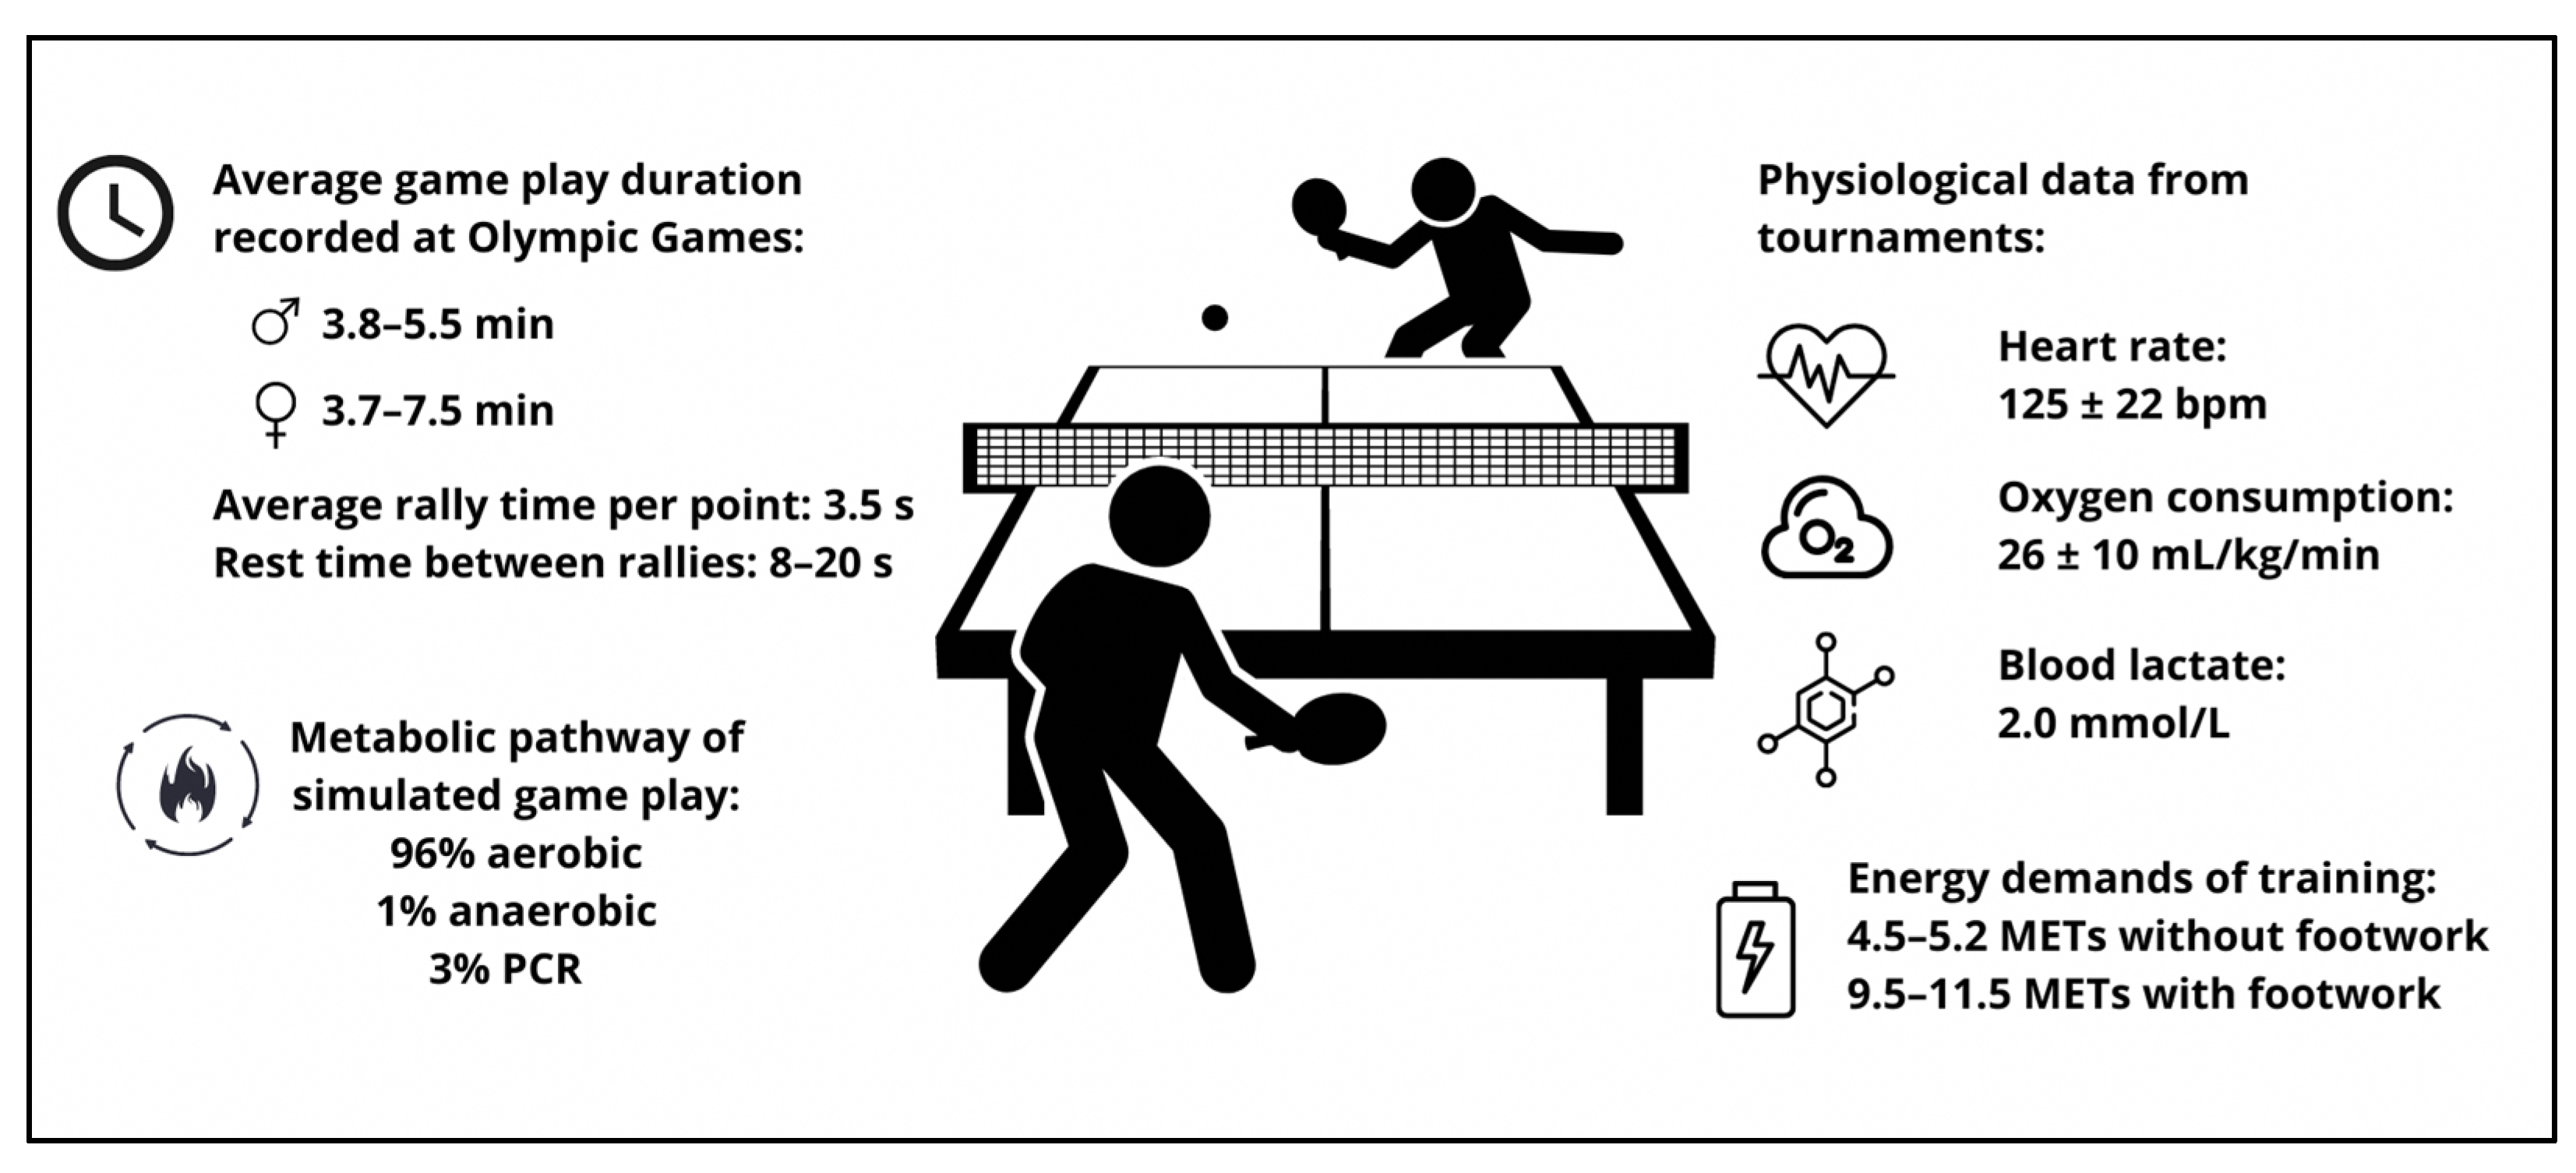 China and Australia relationship could benefit from ping pong